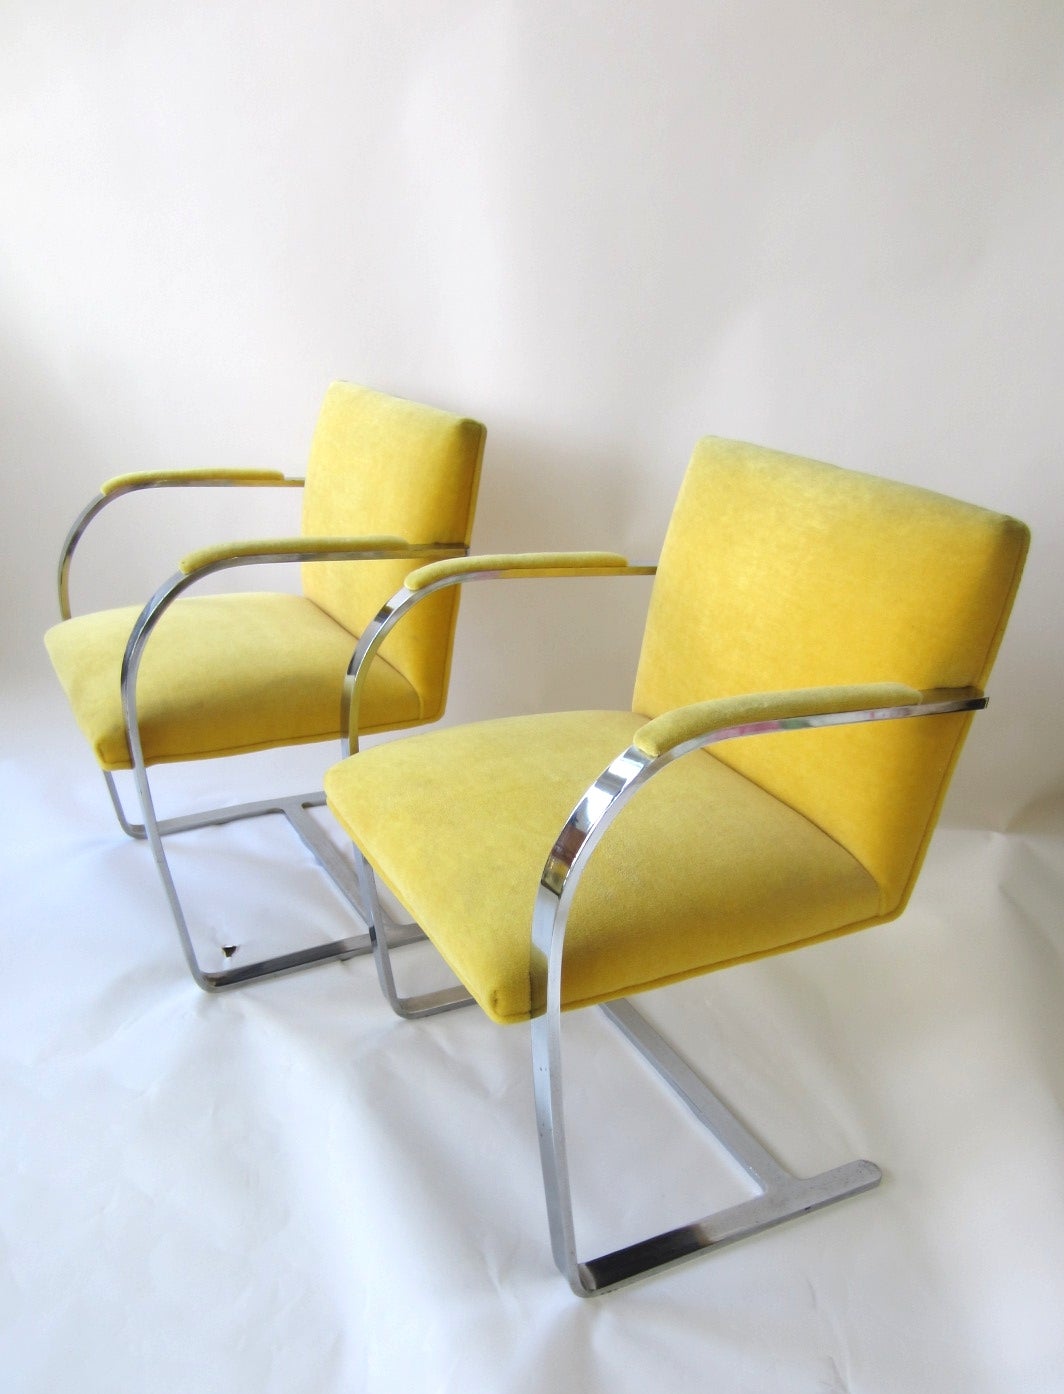 Set of six plated flat bar steel BRNO chairs designed by Mies van der Rohe, circa 1960s. Upholstered in Italian yellow Mohair.